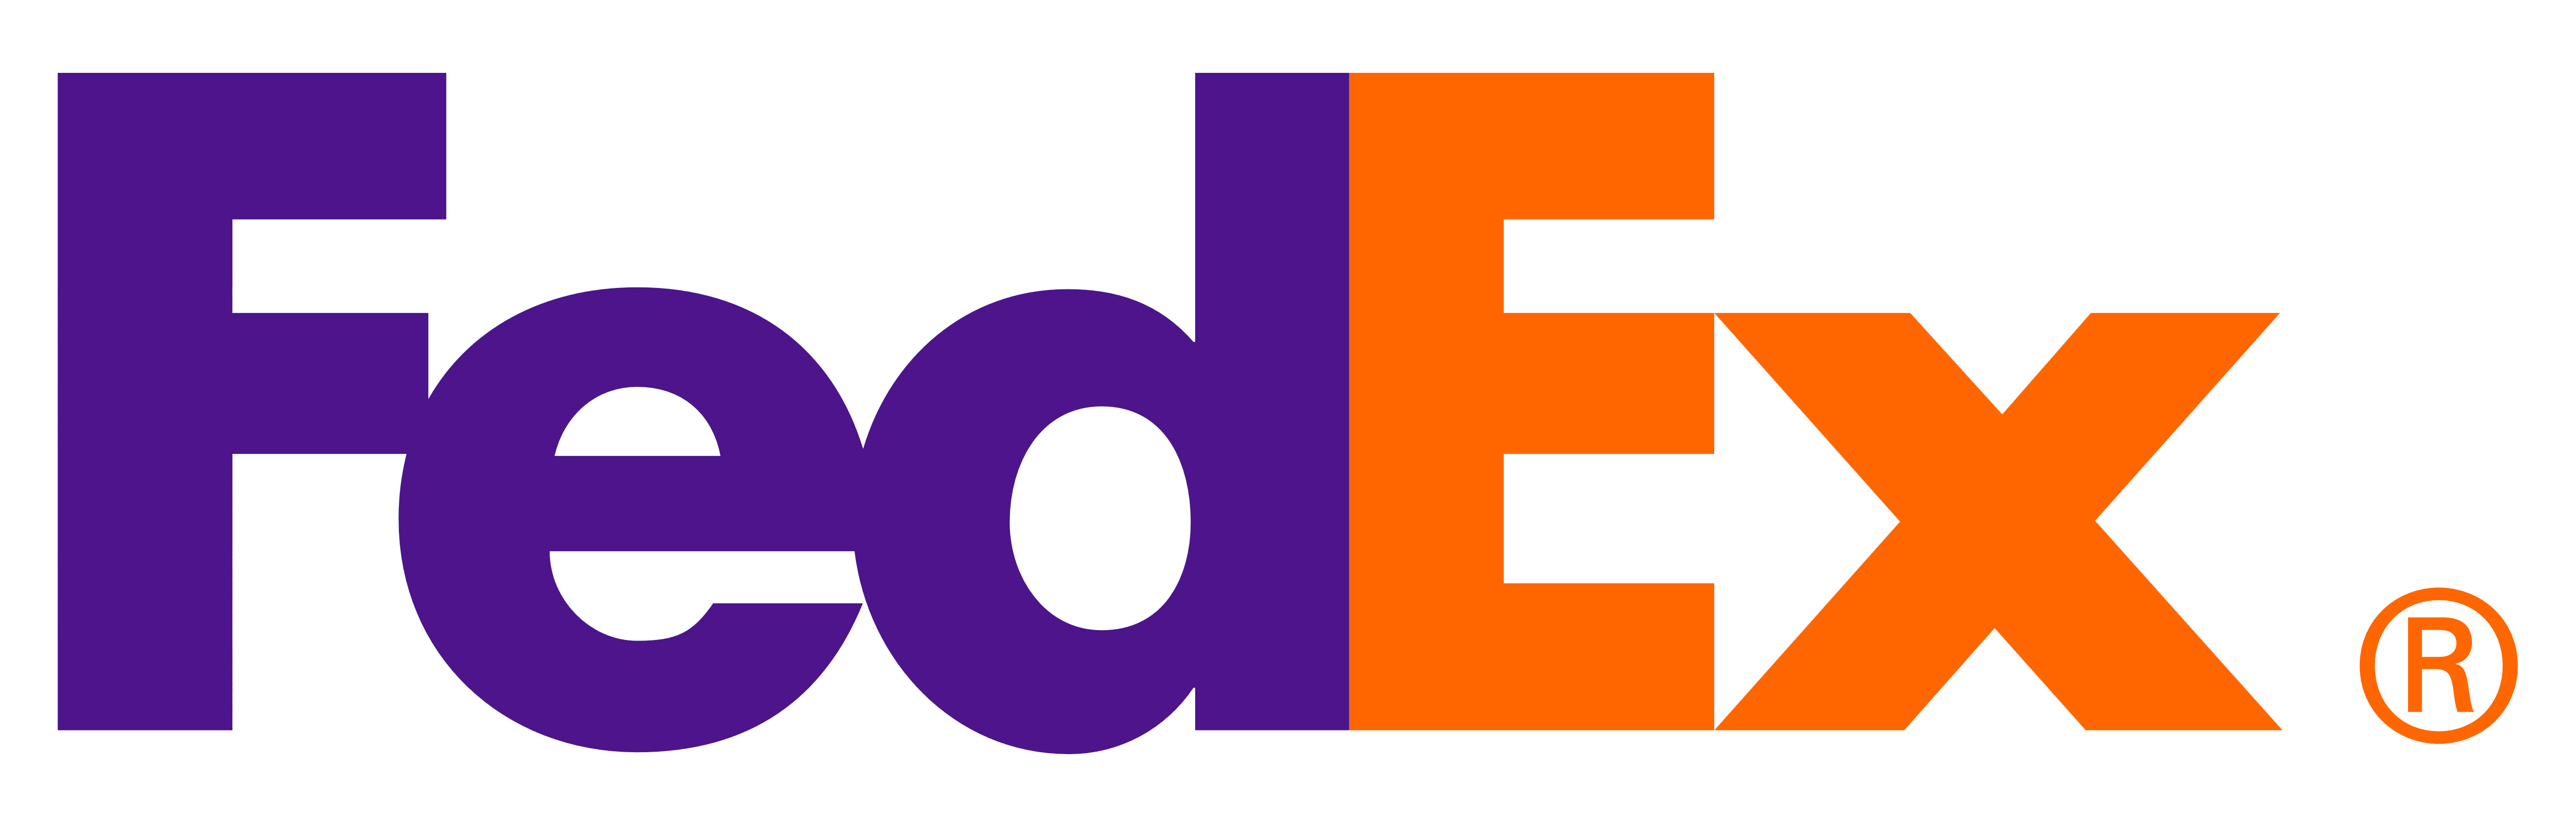 Fedex icon download free clipart with a transparent.